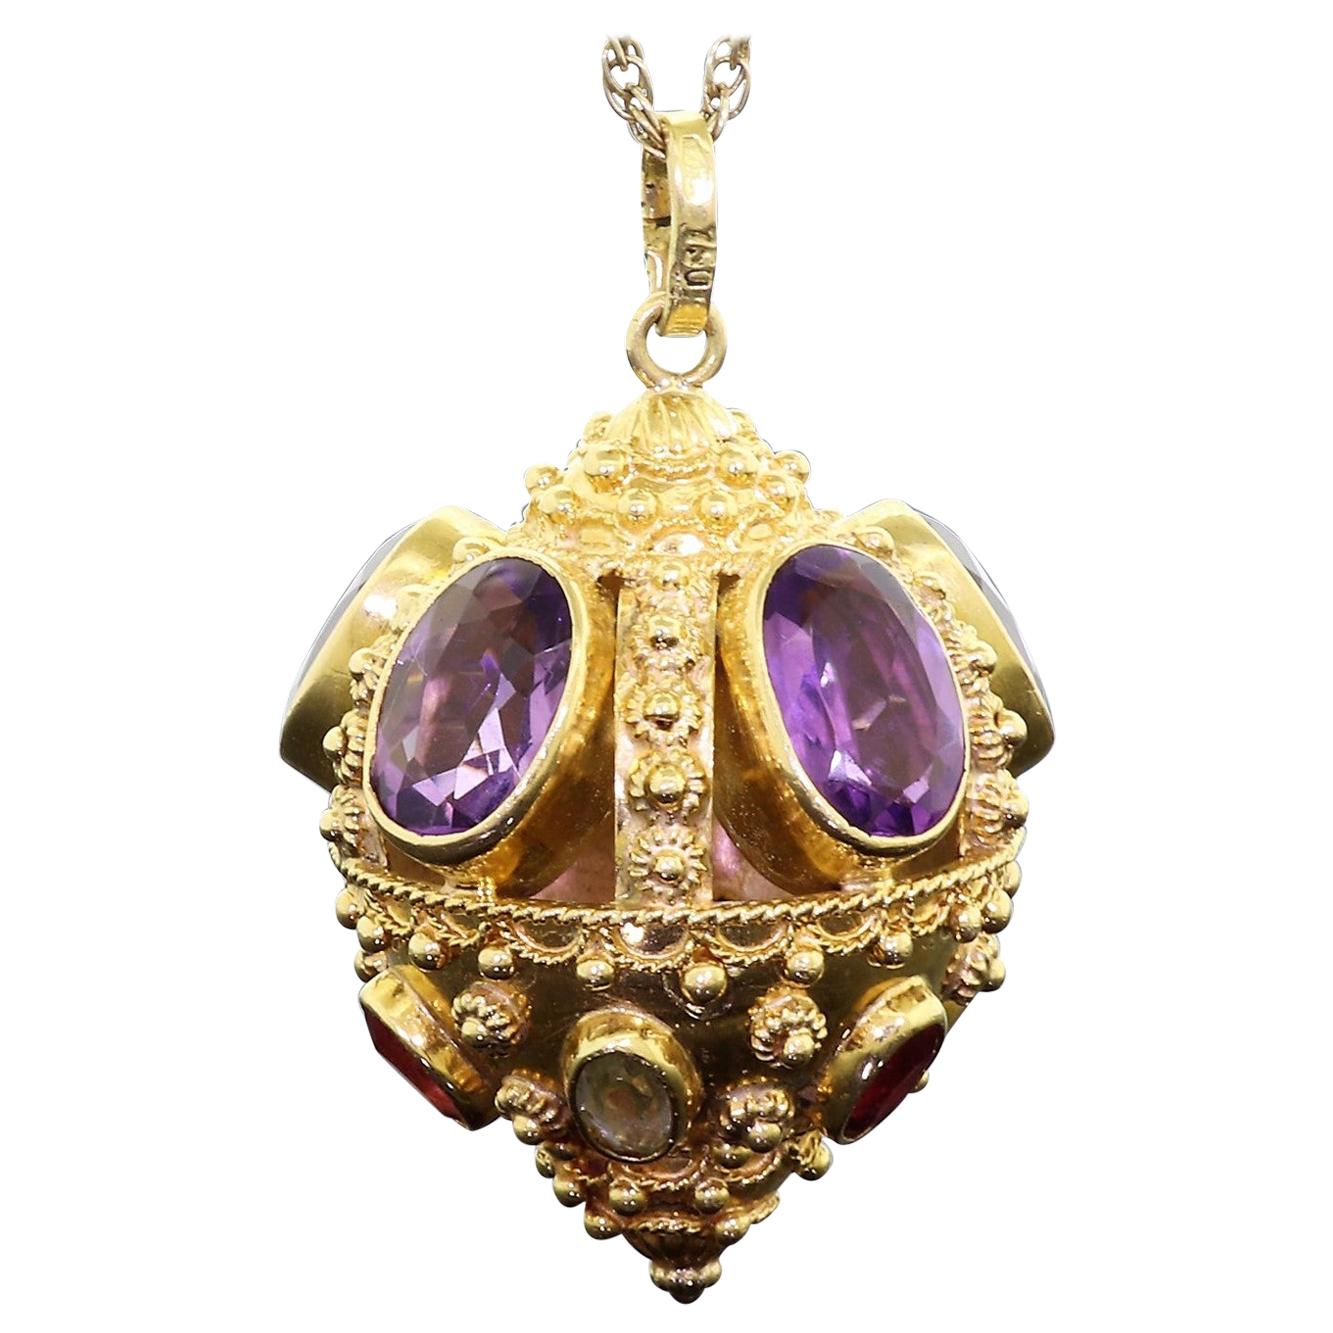 Contanessi Alessandro 18K Gold Etruscan Style Amethyst Fob Charm Pendant 24.8 Gr